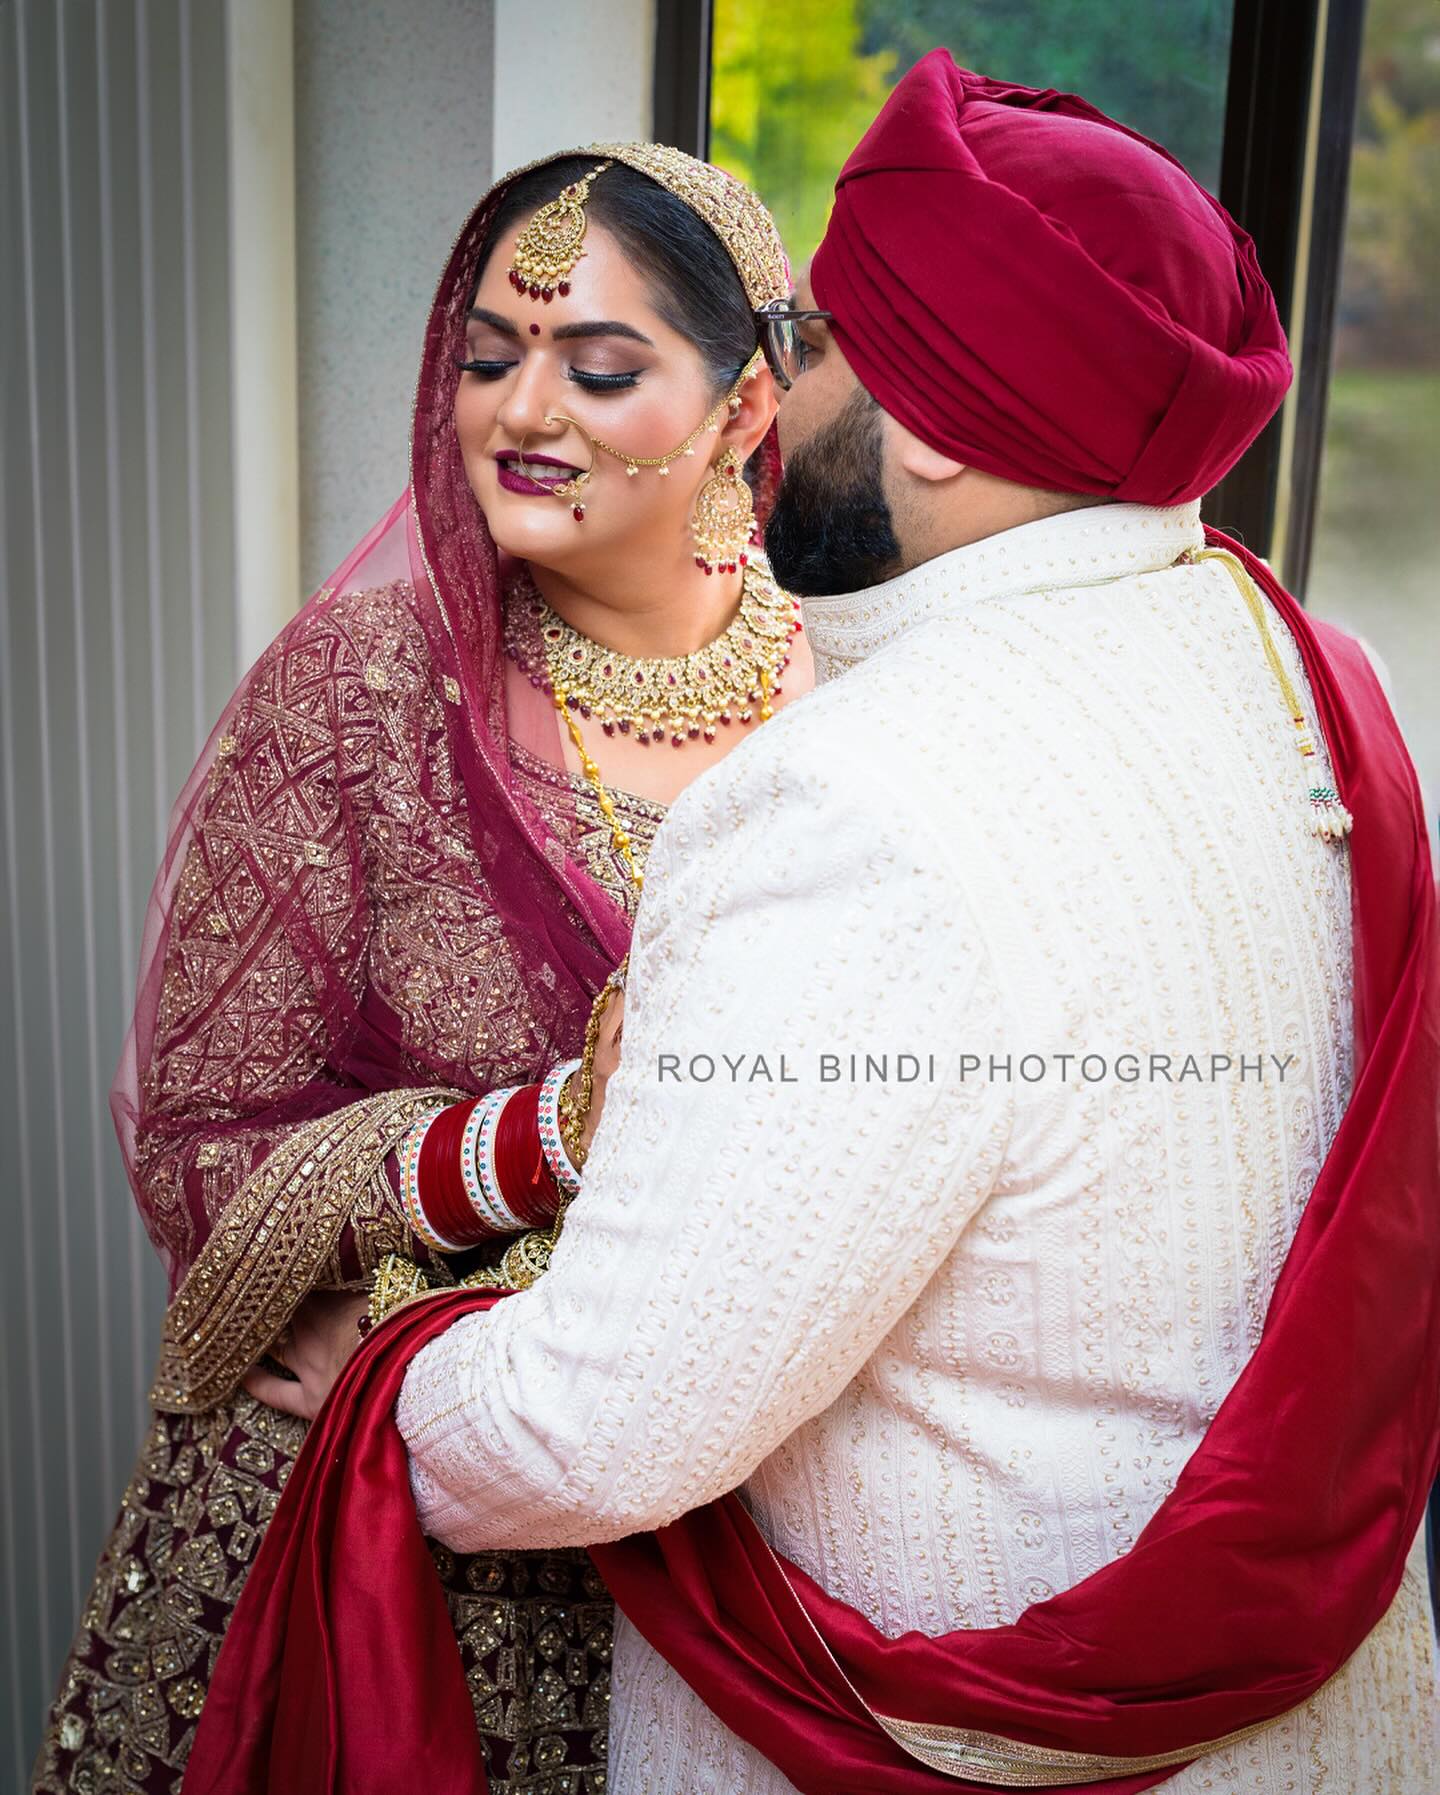 Sikh Wedding Photography &amp; Videography in London